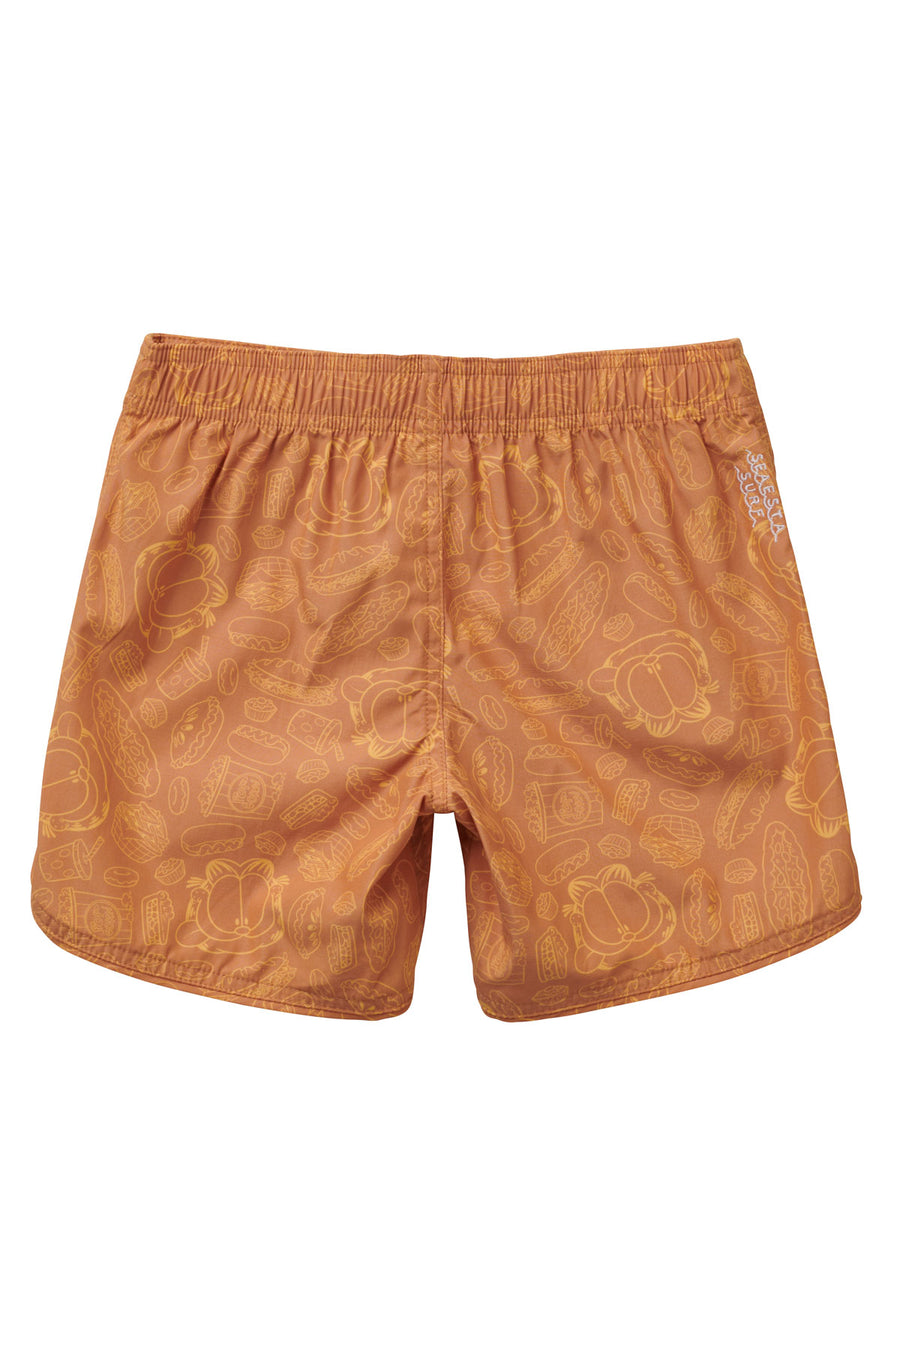 Seaesta Surf x Garfield® Boardshorts / Youth / Grilled Cheese